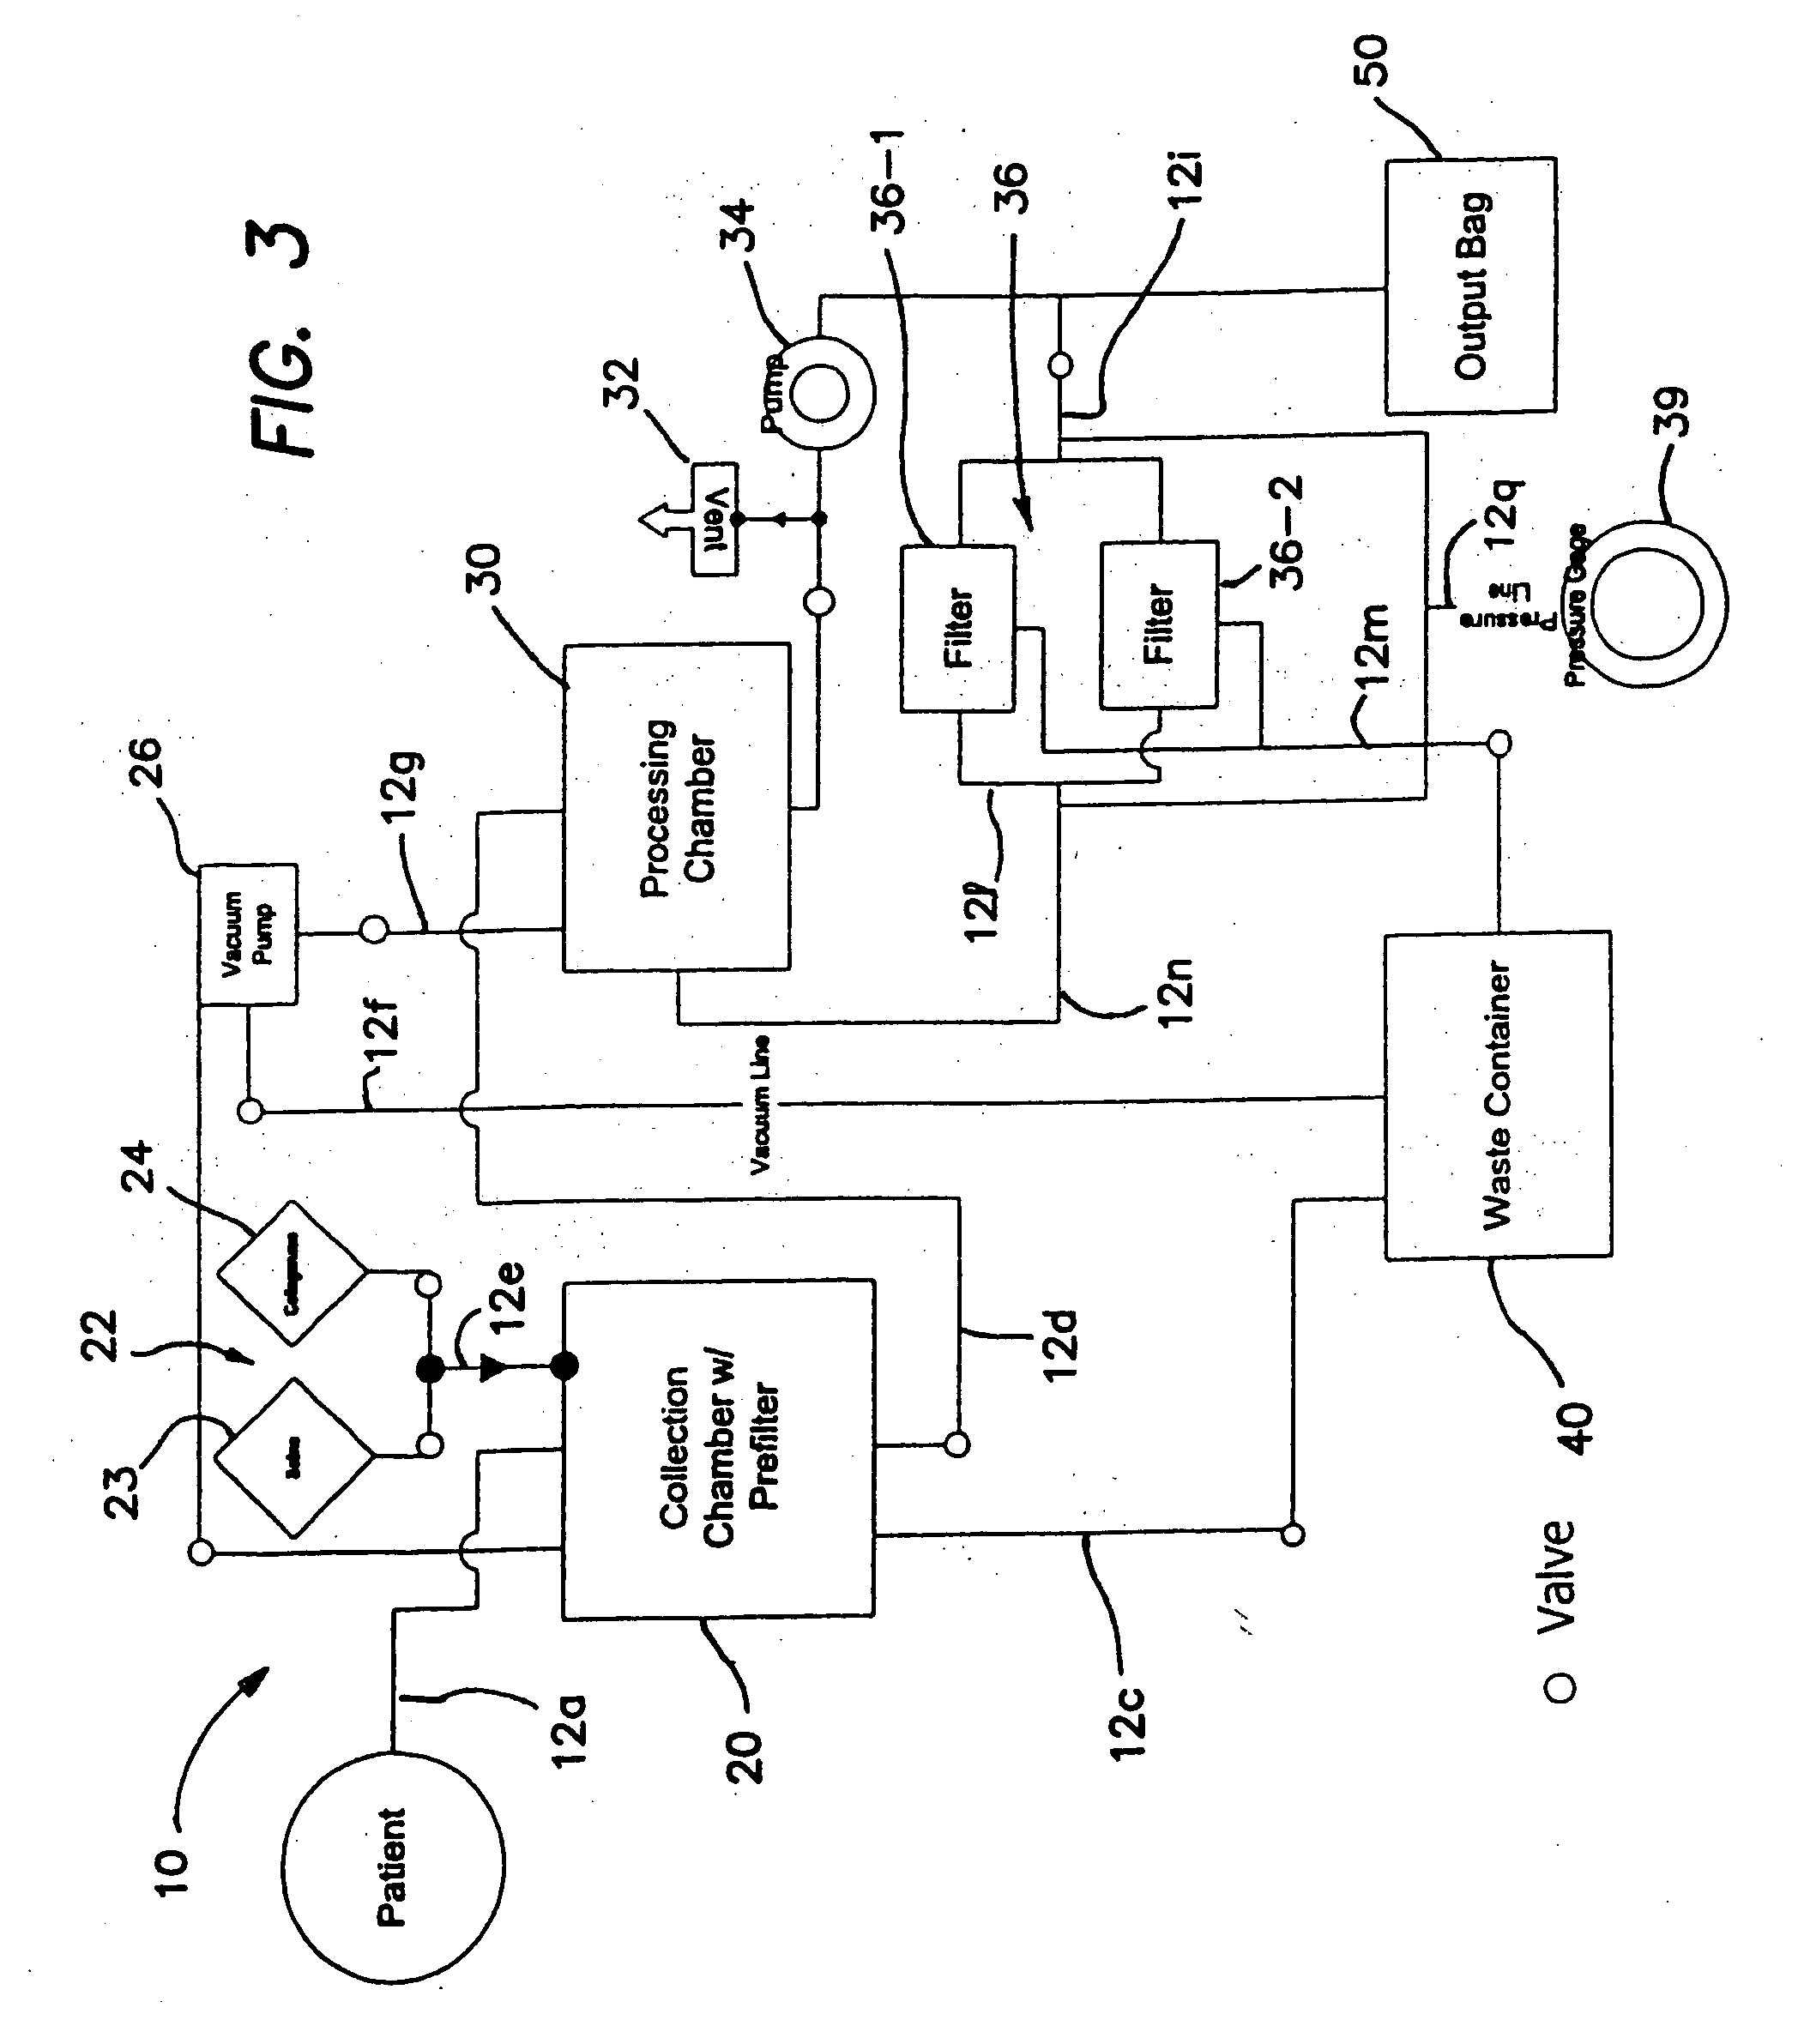 Systems and methods for separating and concentrating regenerative cells from tissue